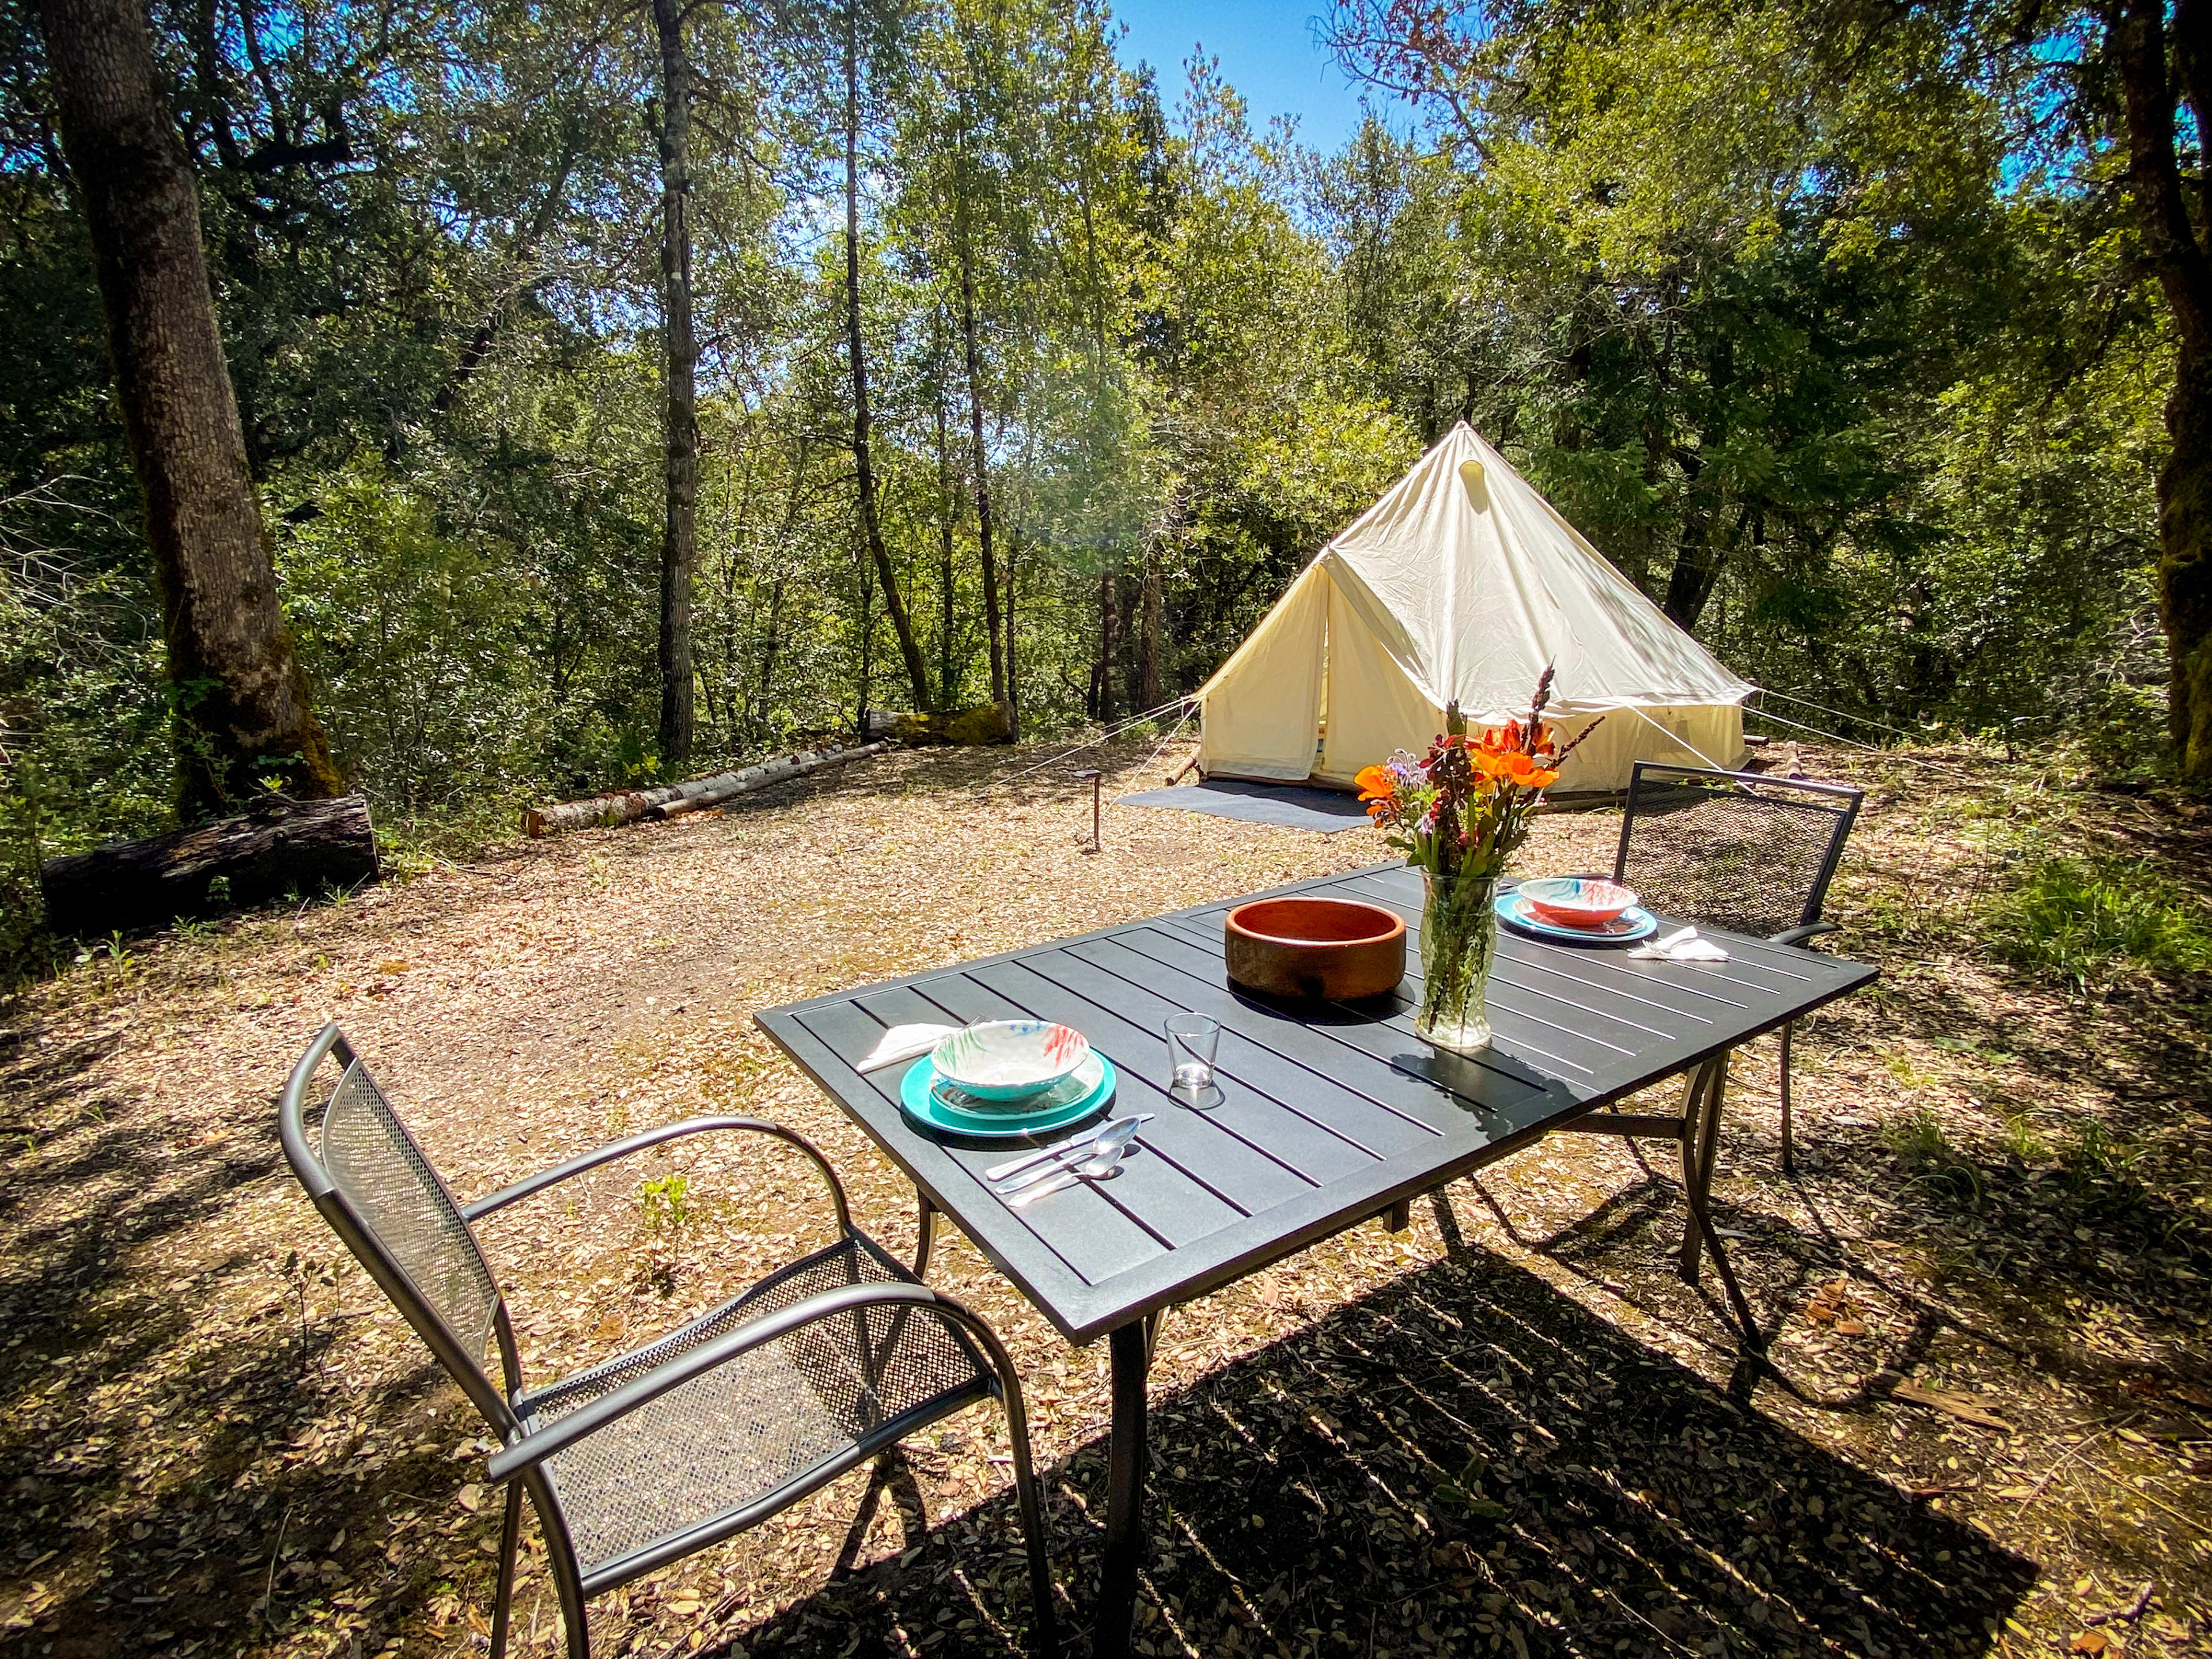 The Knoll campsite has a 13ft diameter round tent, privacy fencing, an outdoor kitchenette with a 1-burner propane stove, and complete dining table. There is an outdoor shower, as well as garbage and portopotty service. 